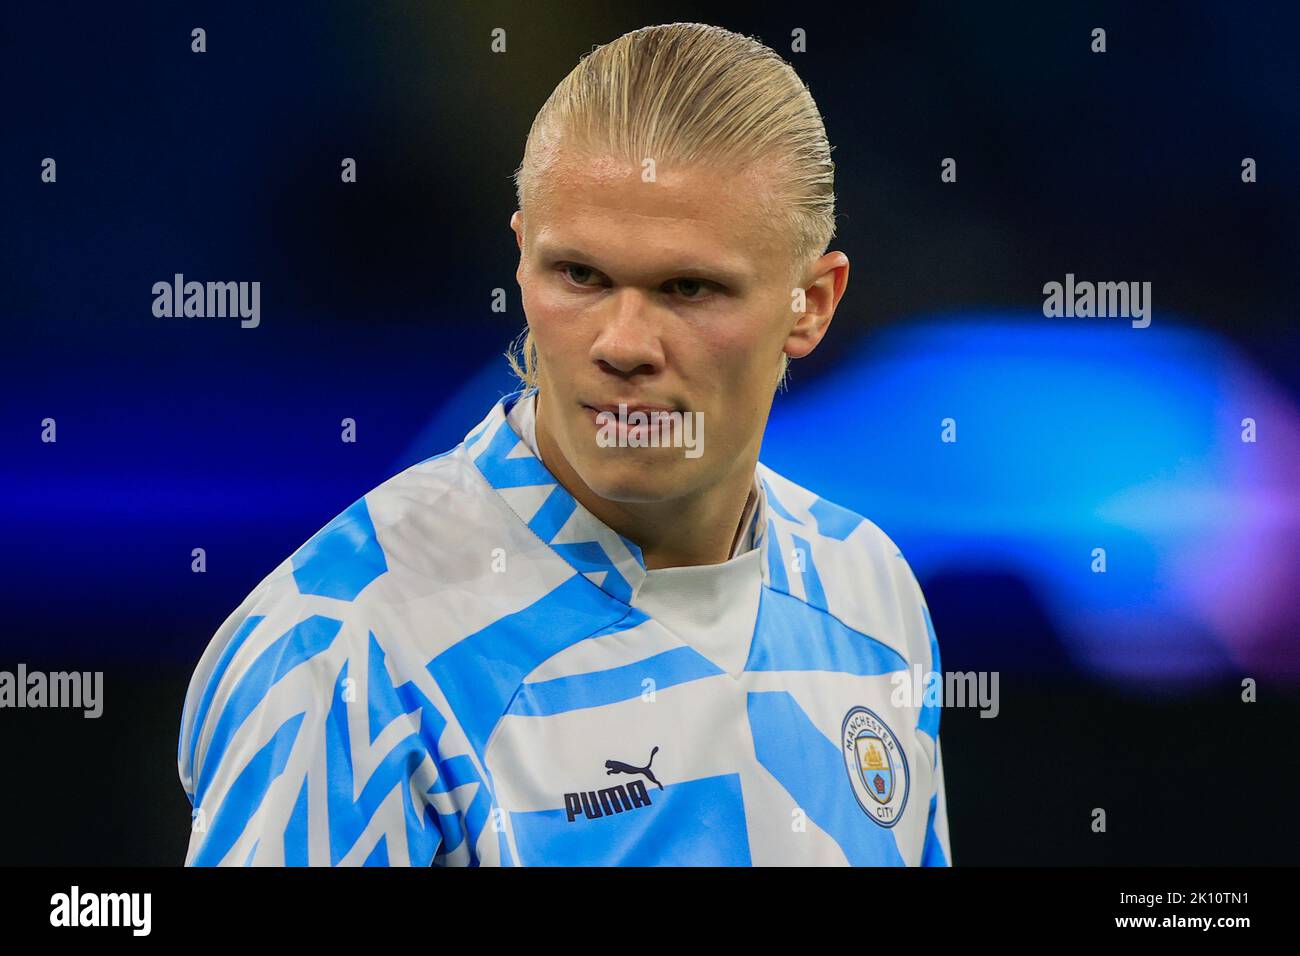 Manchester, UK. 14th Sep, 2022. Erling Håland #9 of Manchester City during the pre-game warmup during the UEFA Champions League match Manchester City vs Borussia Dortmund at Etihad Stadium, Manchester, United Kingdom, 14th September 2022 (Photo by Conor Molloy/News Images) Credit: News Images LTD/Alamy Live News Stock Photo